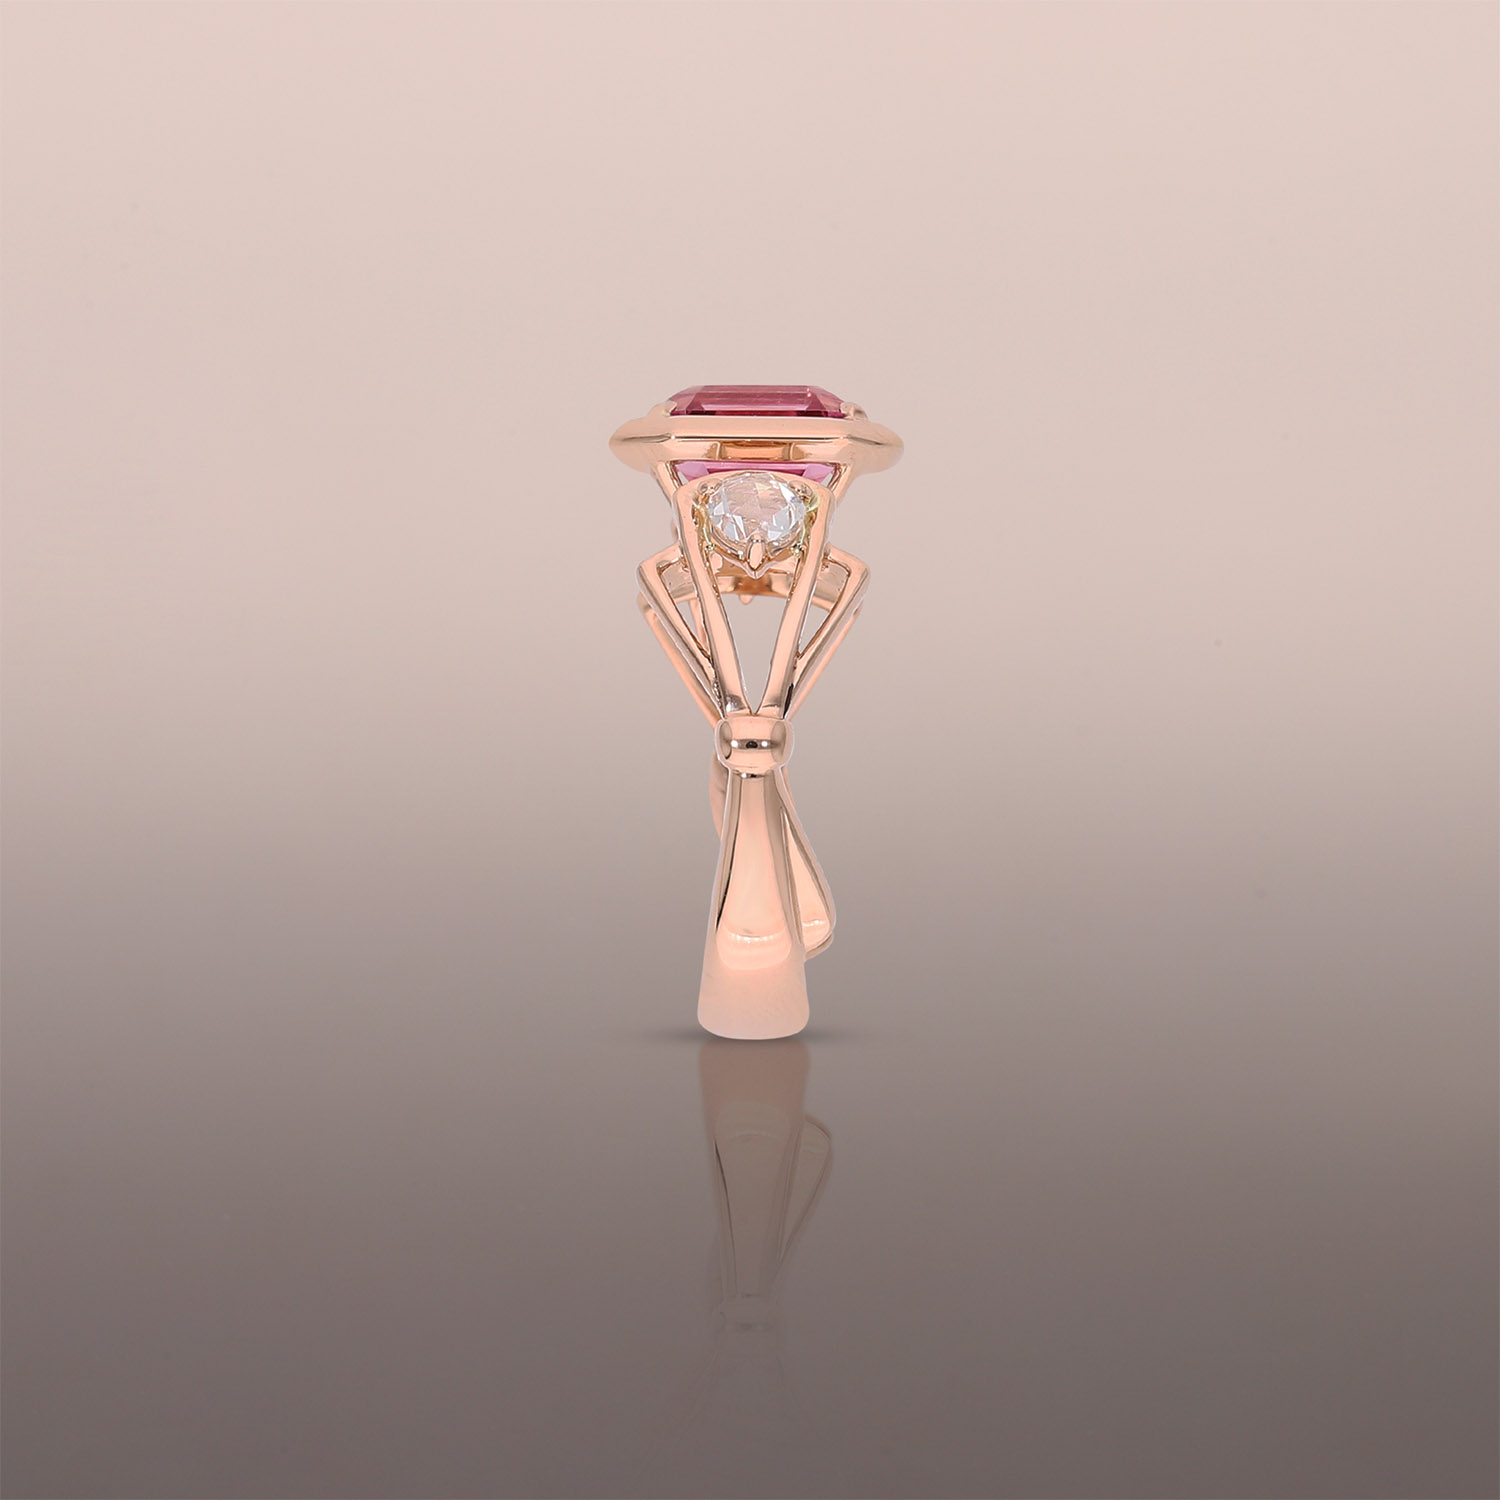 Pink Spinel Ring in Rose Gold